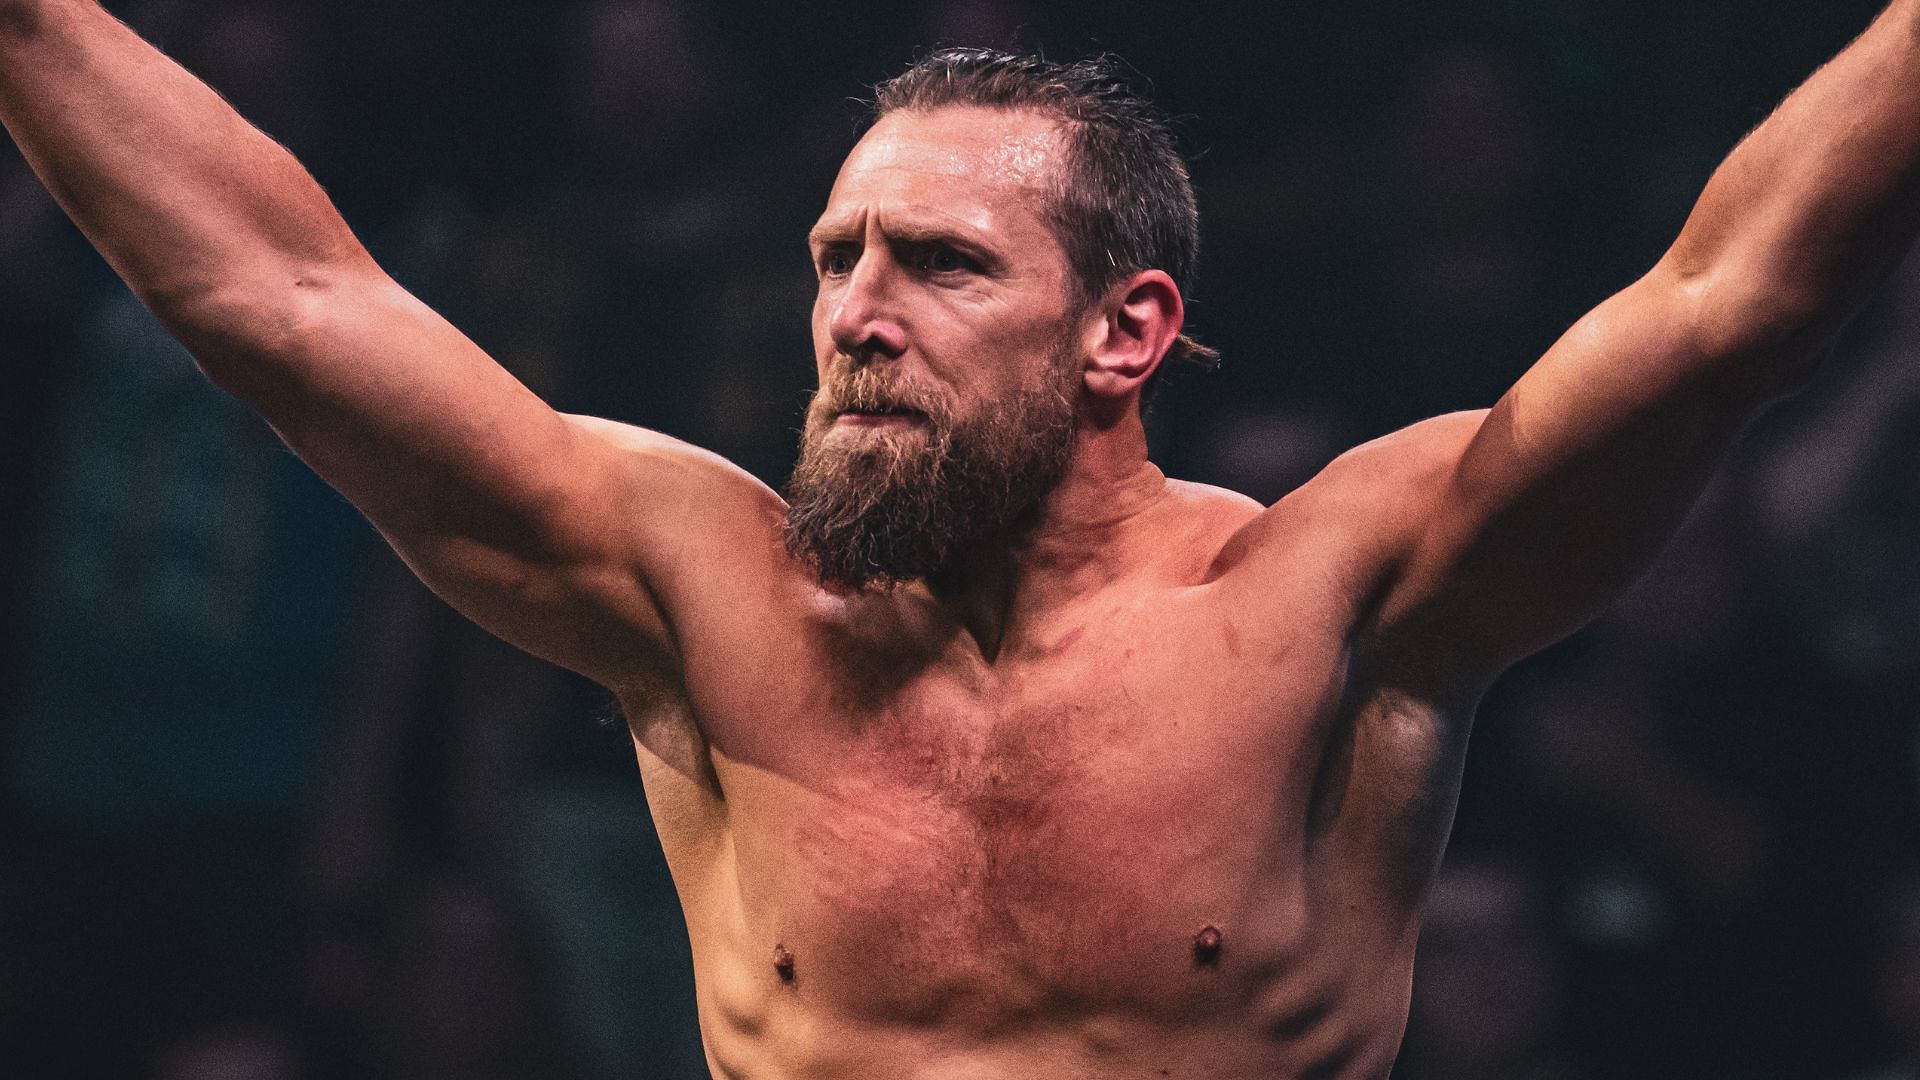 Bryan Danielson at an AEW event in 2022 (credit: Jay Lee Photography)